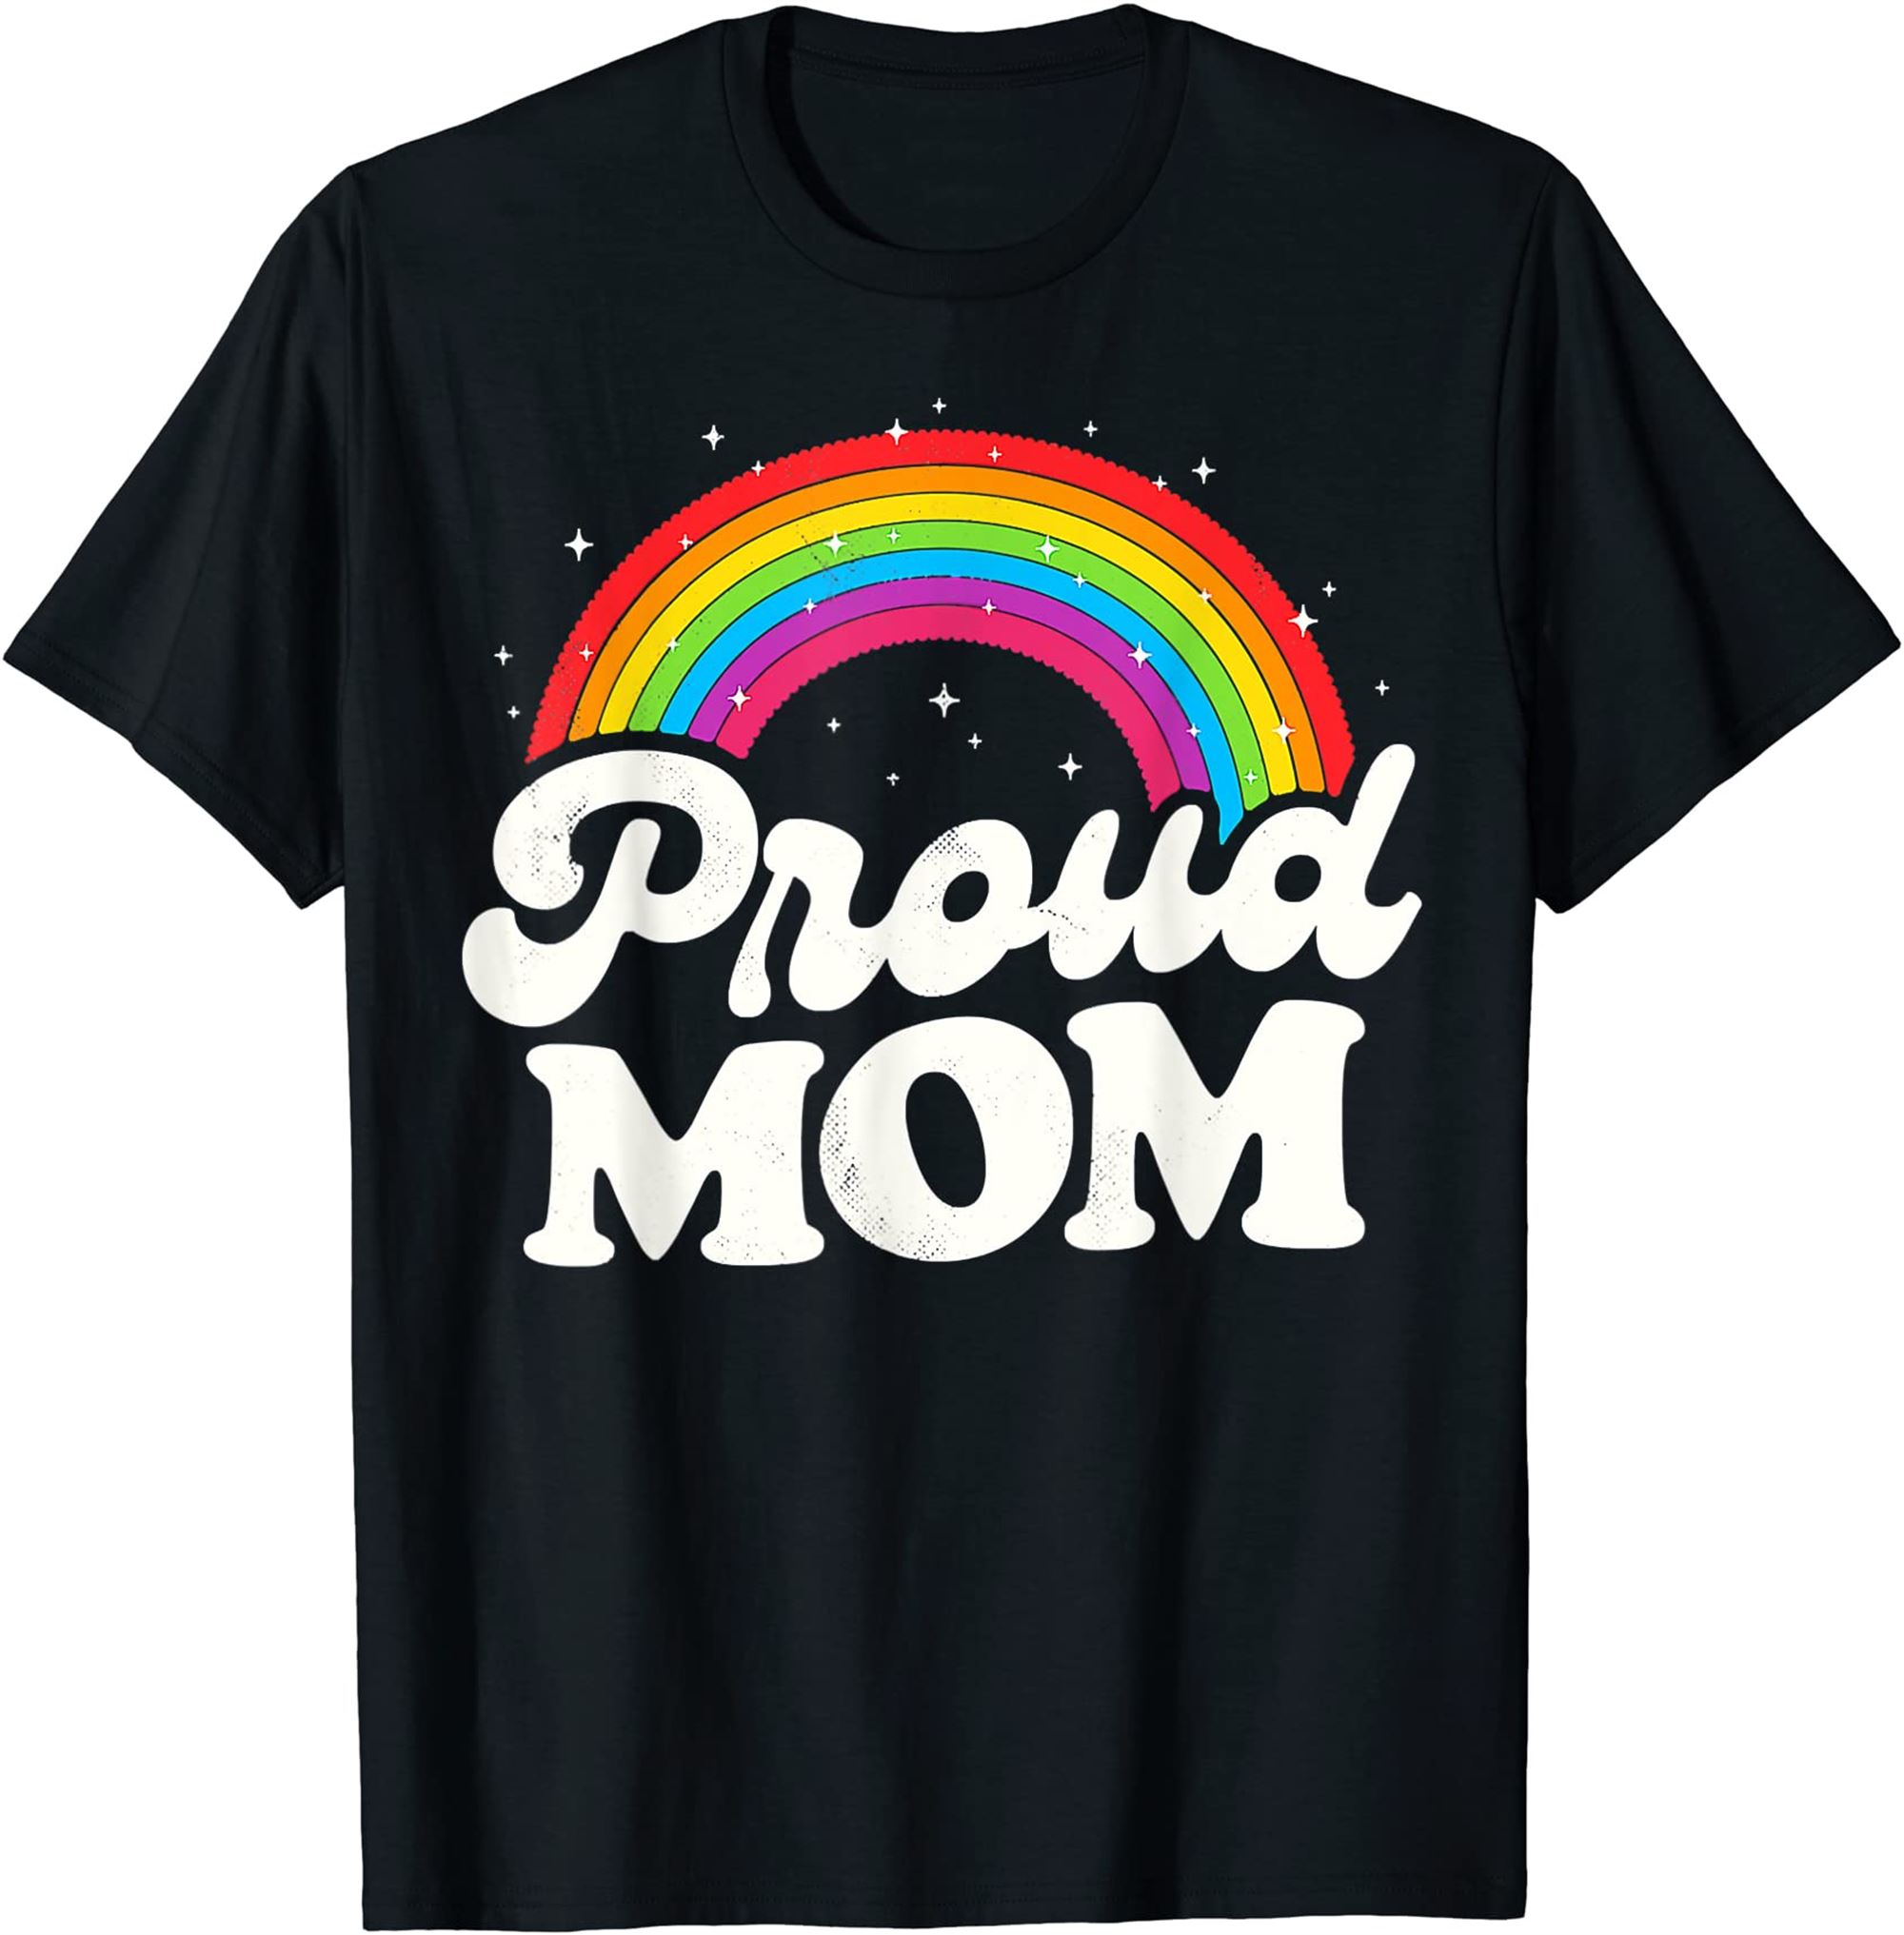 Lgbtq Proud Mom Gay Pride Lgbt Ally Rainbow Mothers Day T-shirt Size Up To 5xl